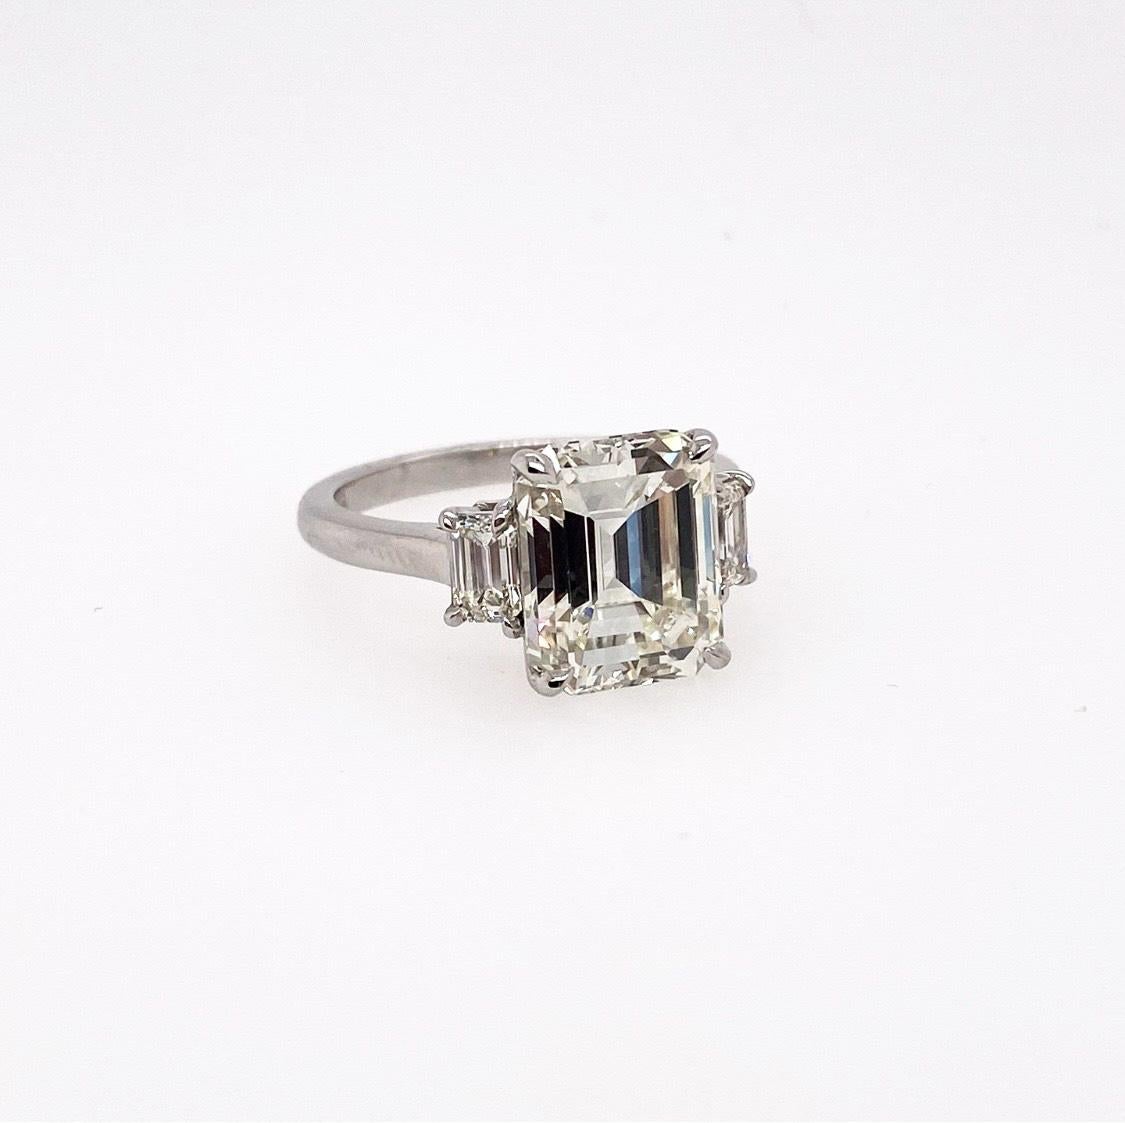 GIA Certified 4.69 carat Emerald Cut diamond is perfectly accentuated with another two beautifully emerald cut diamonds mounted on the side of the ring respectively. This stylish three-stone ring features the sophisticated statement and the